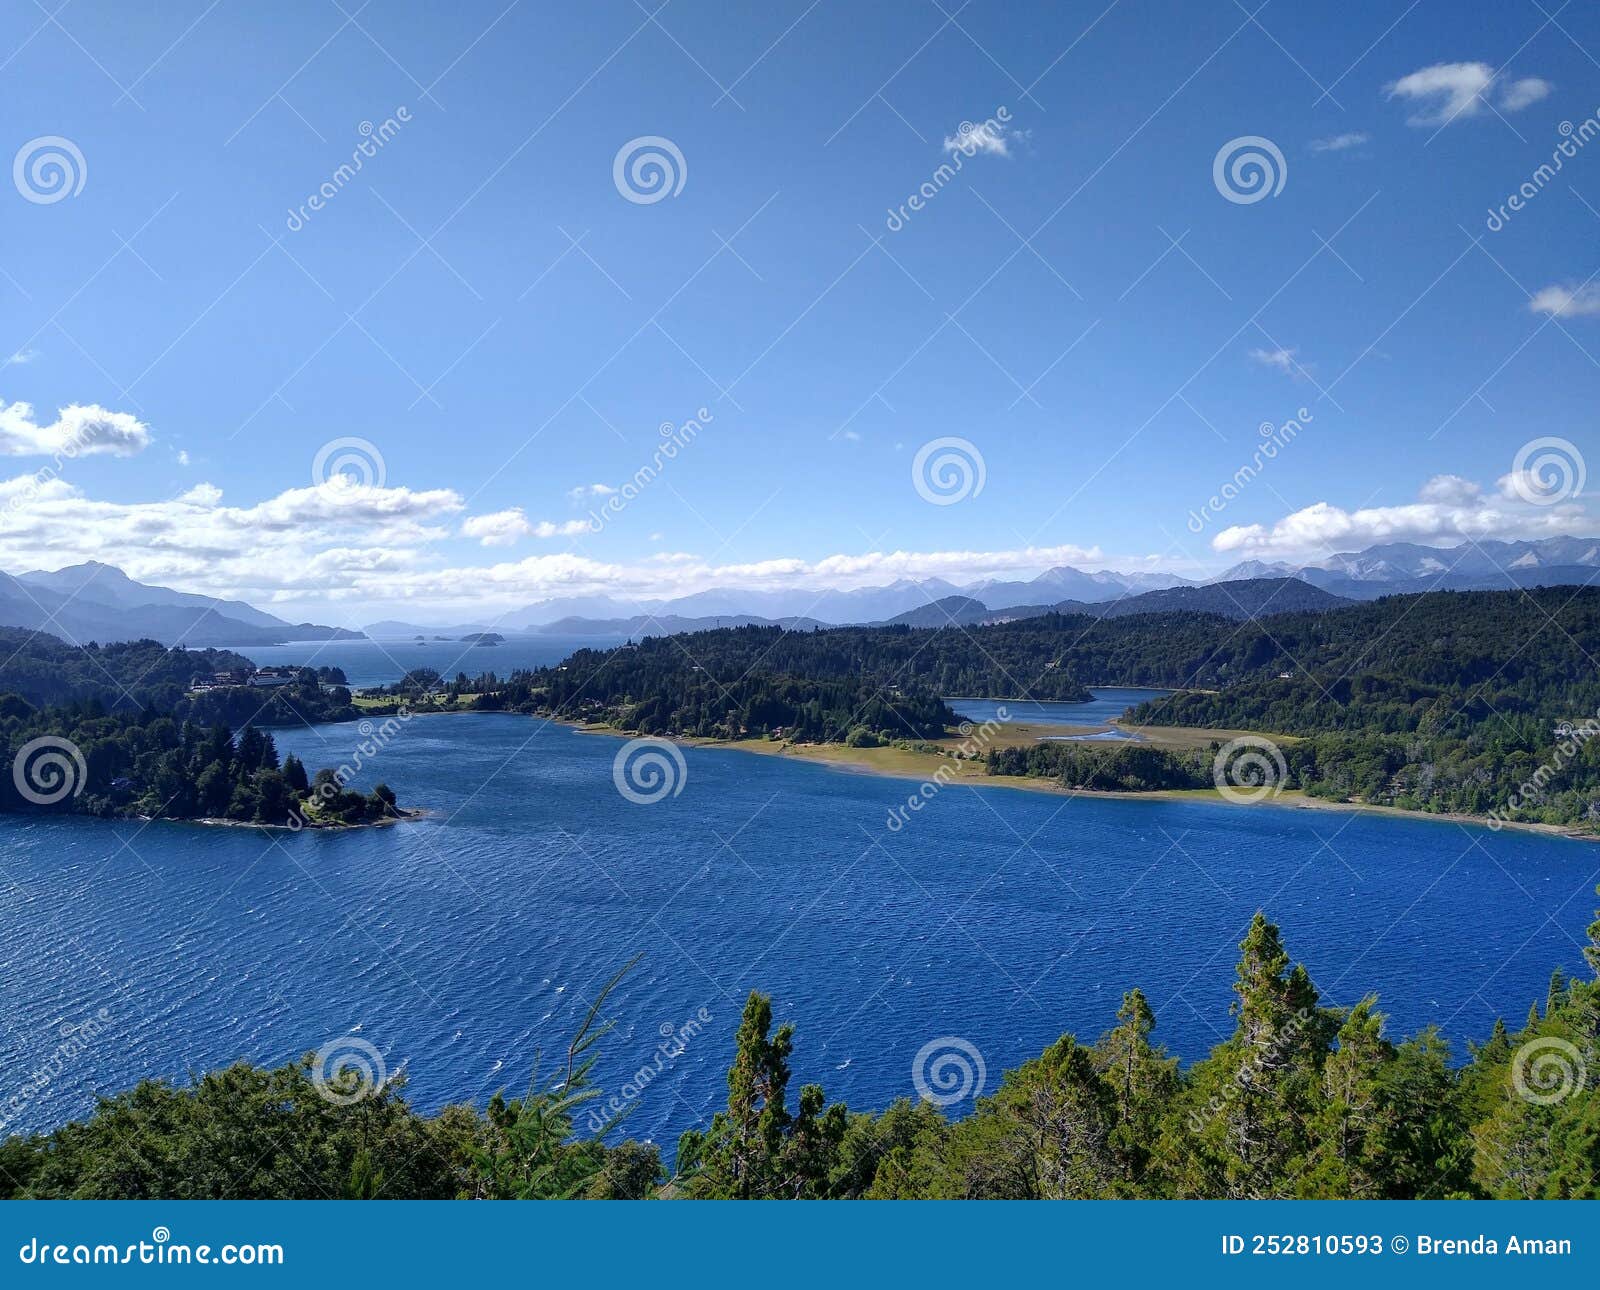 patagonian lakes of bariloche argentina